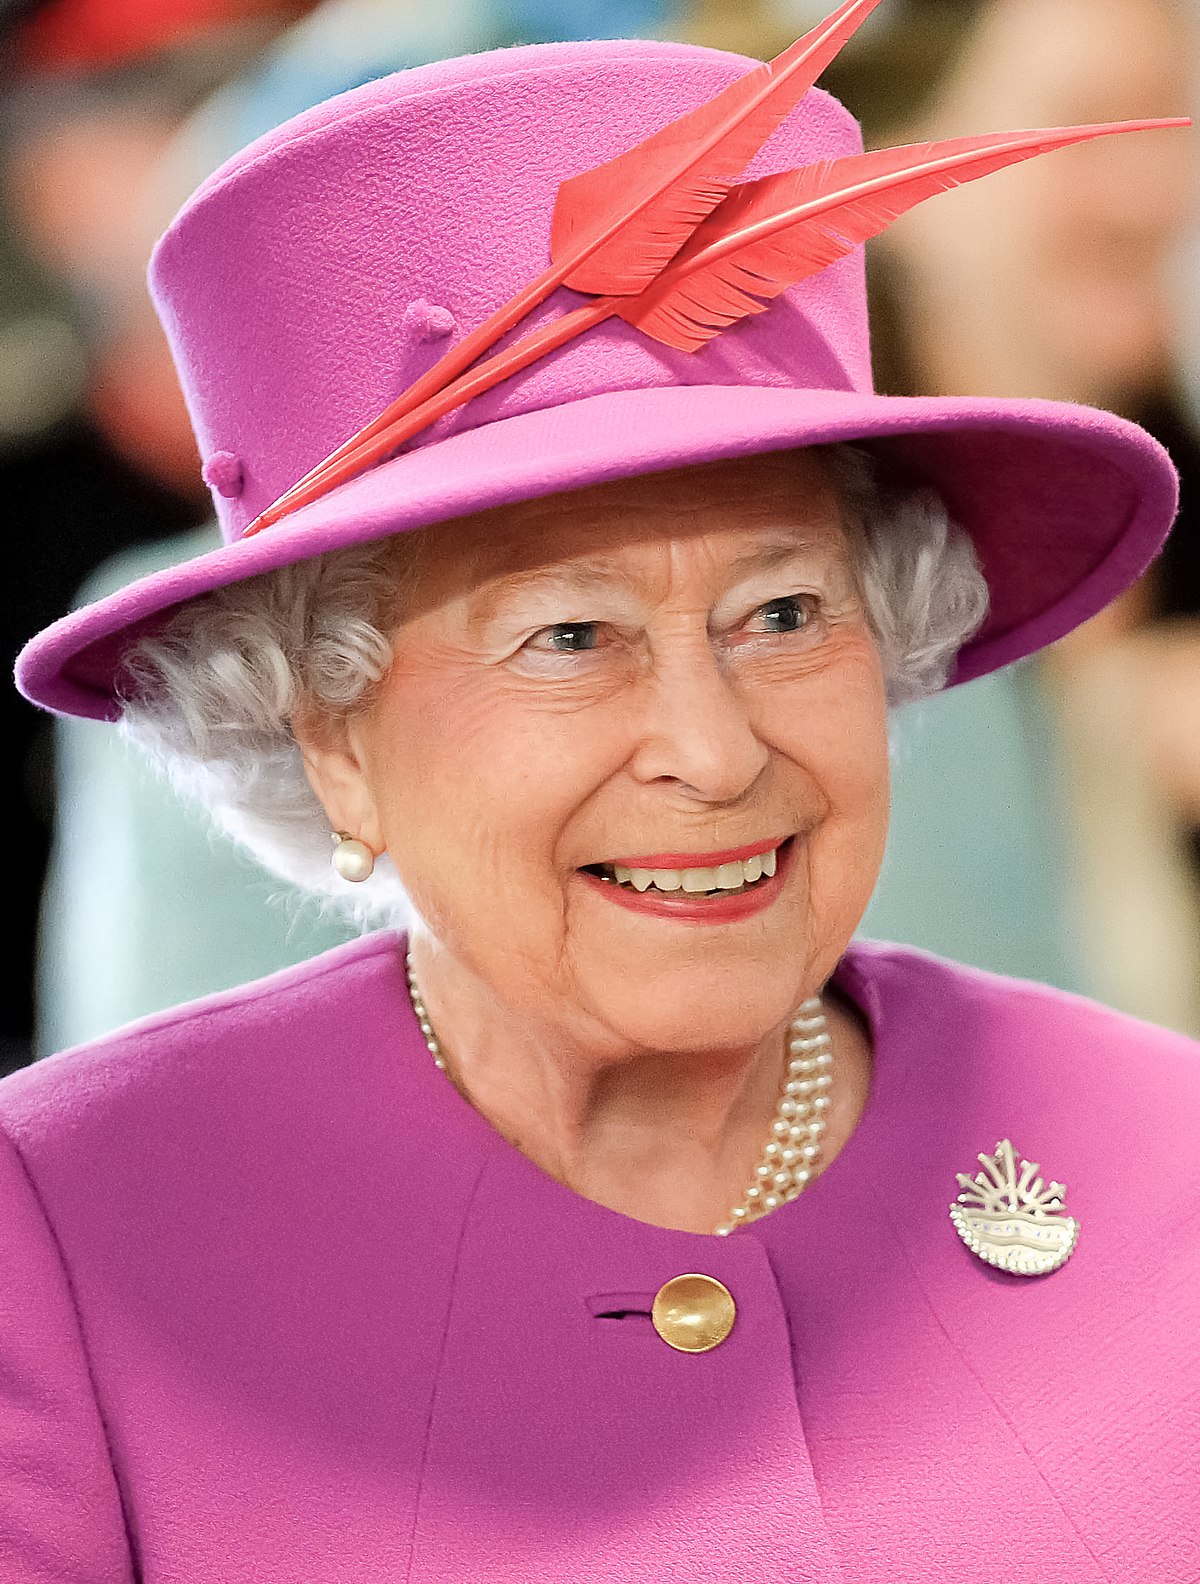 Queen Elizabeth II spent night in hospital for tests: palace